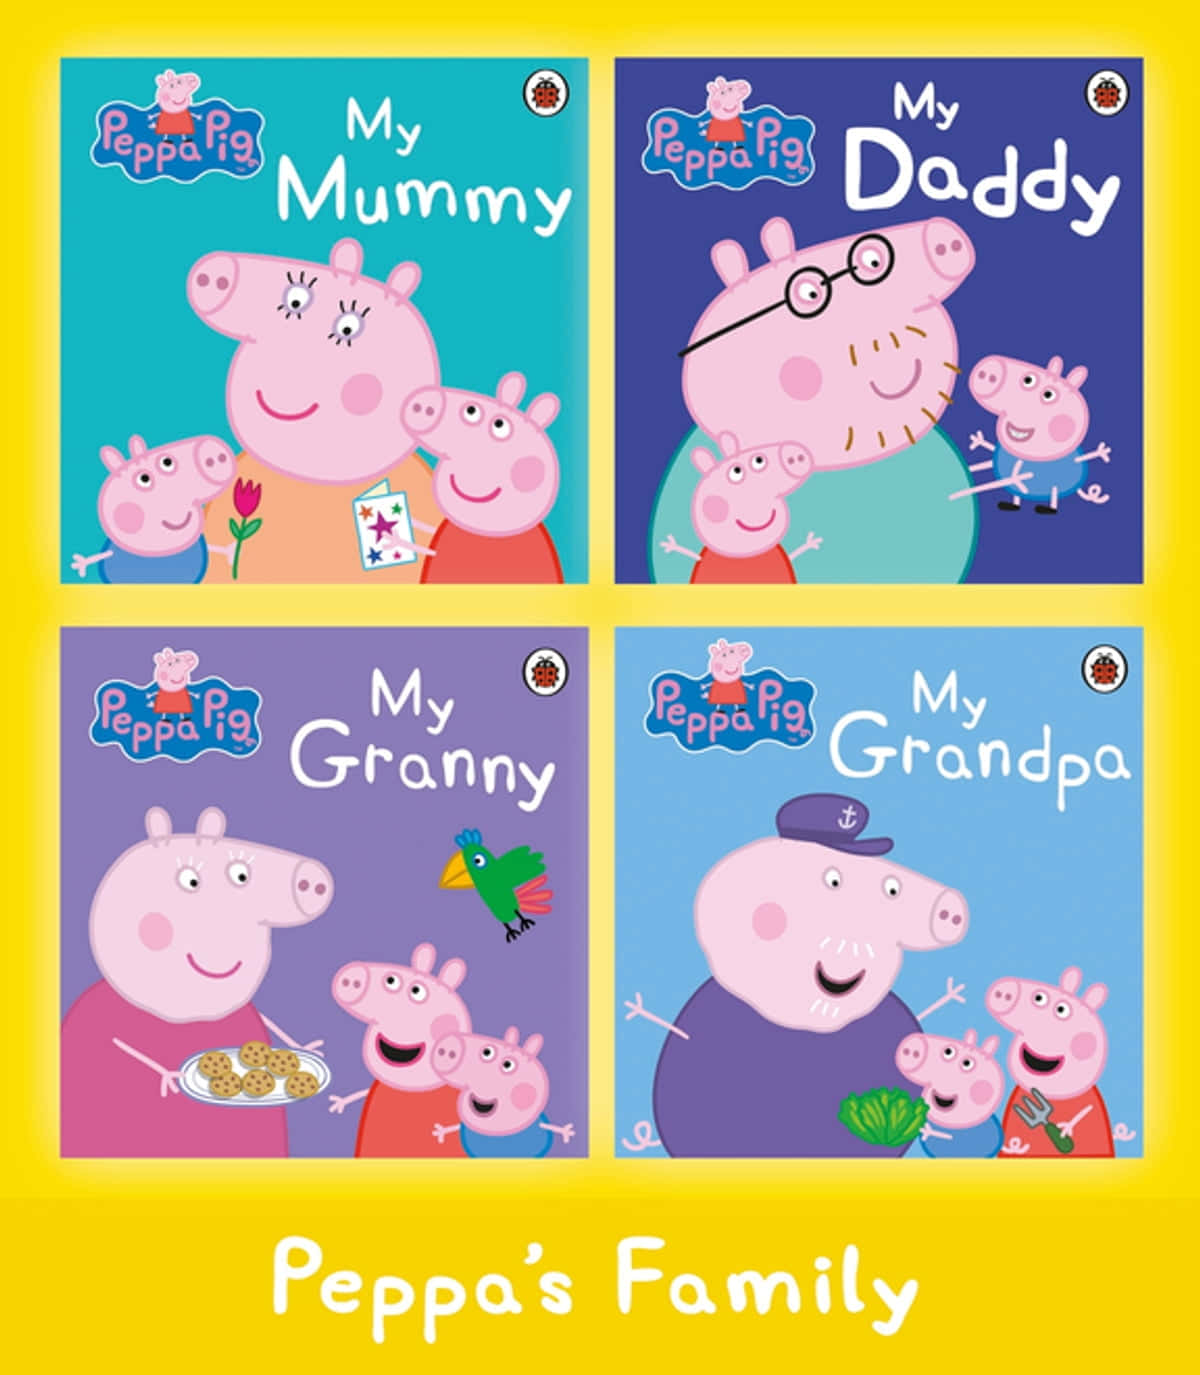 Welcome to the Peppa Pig Family